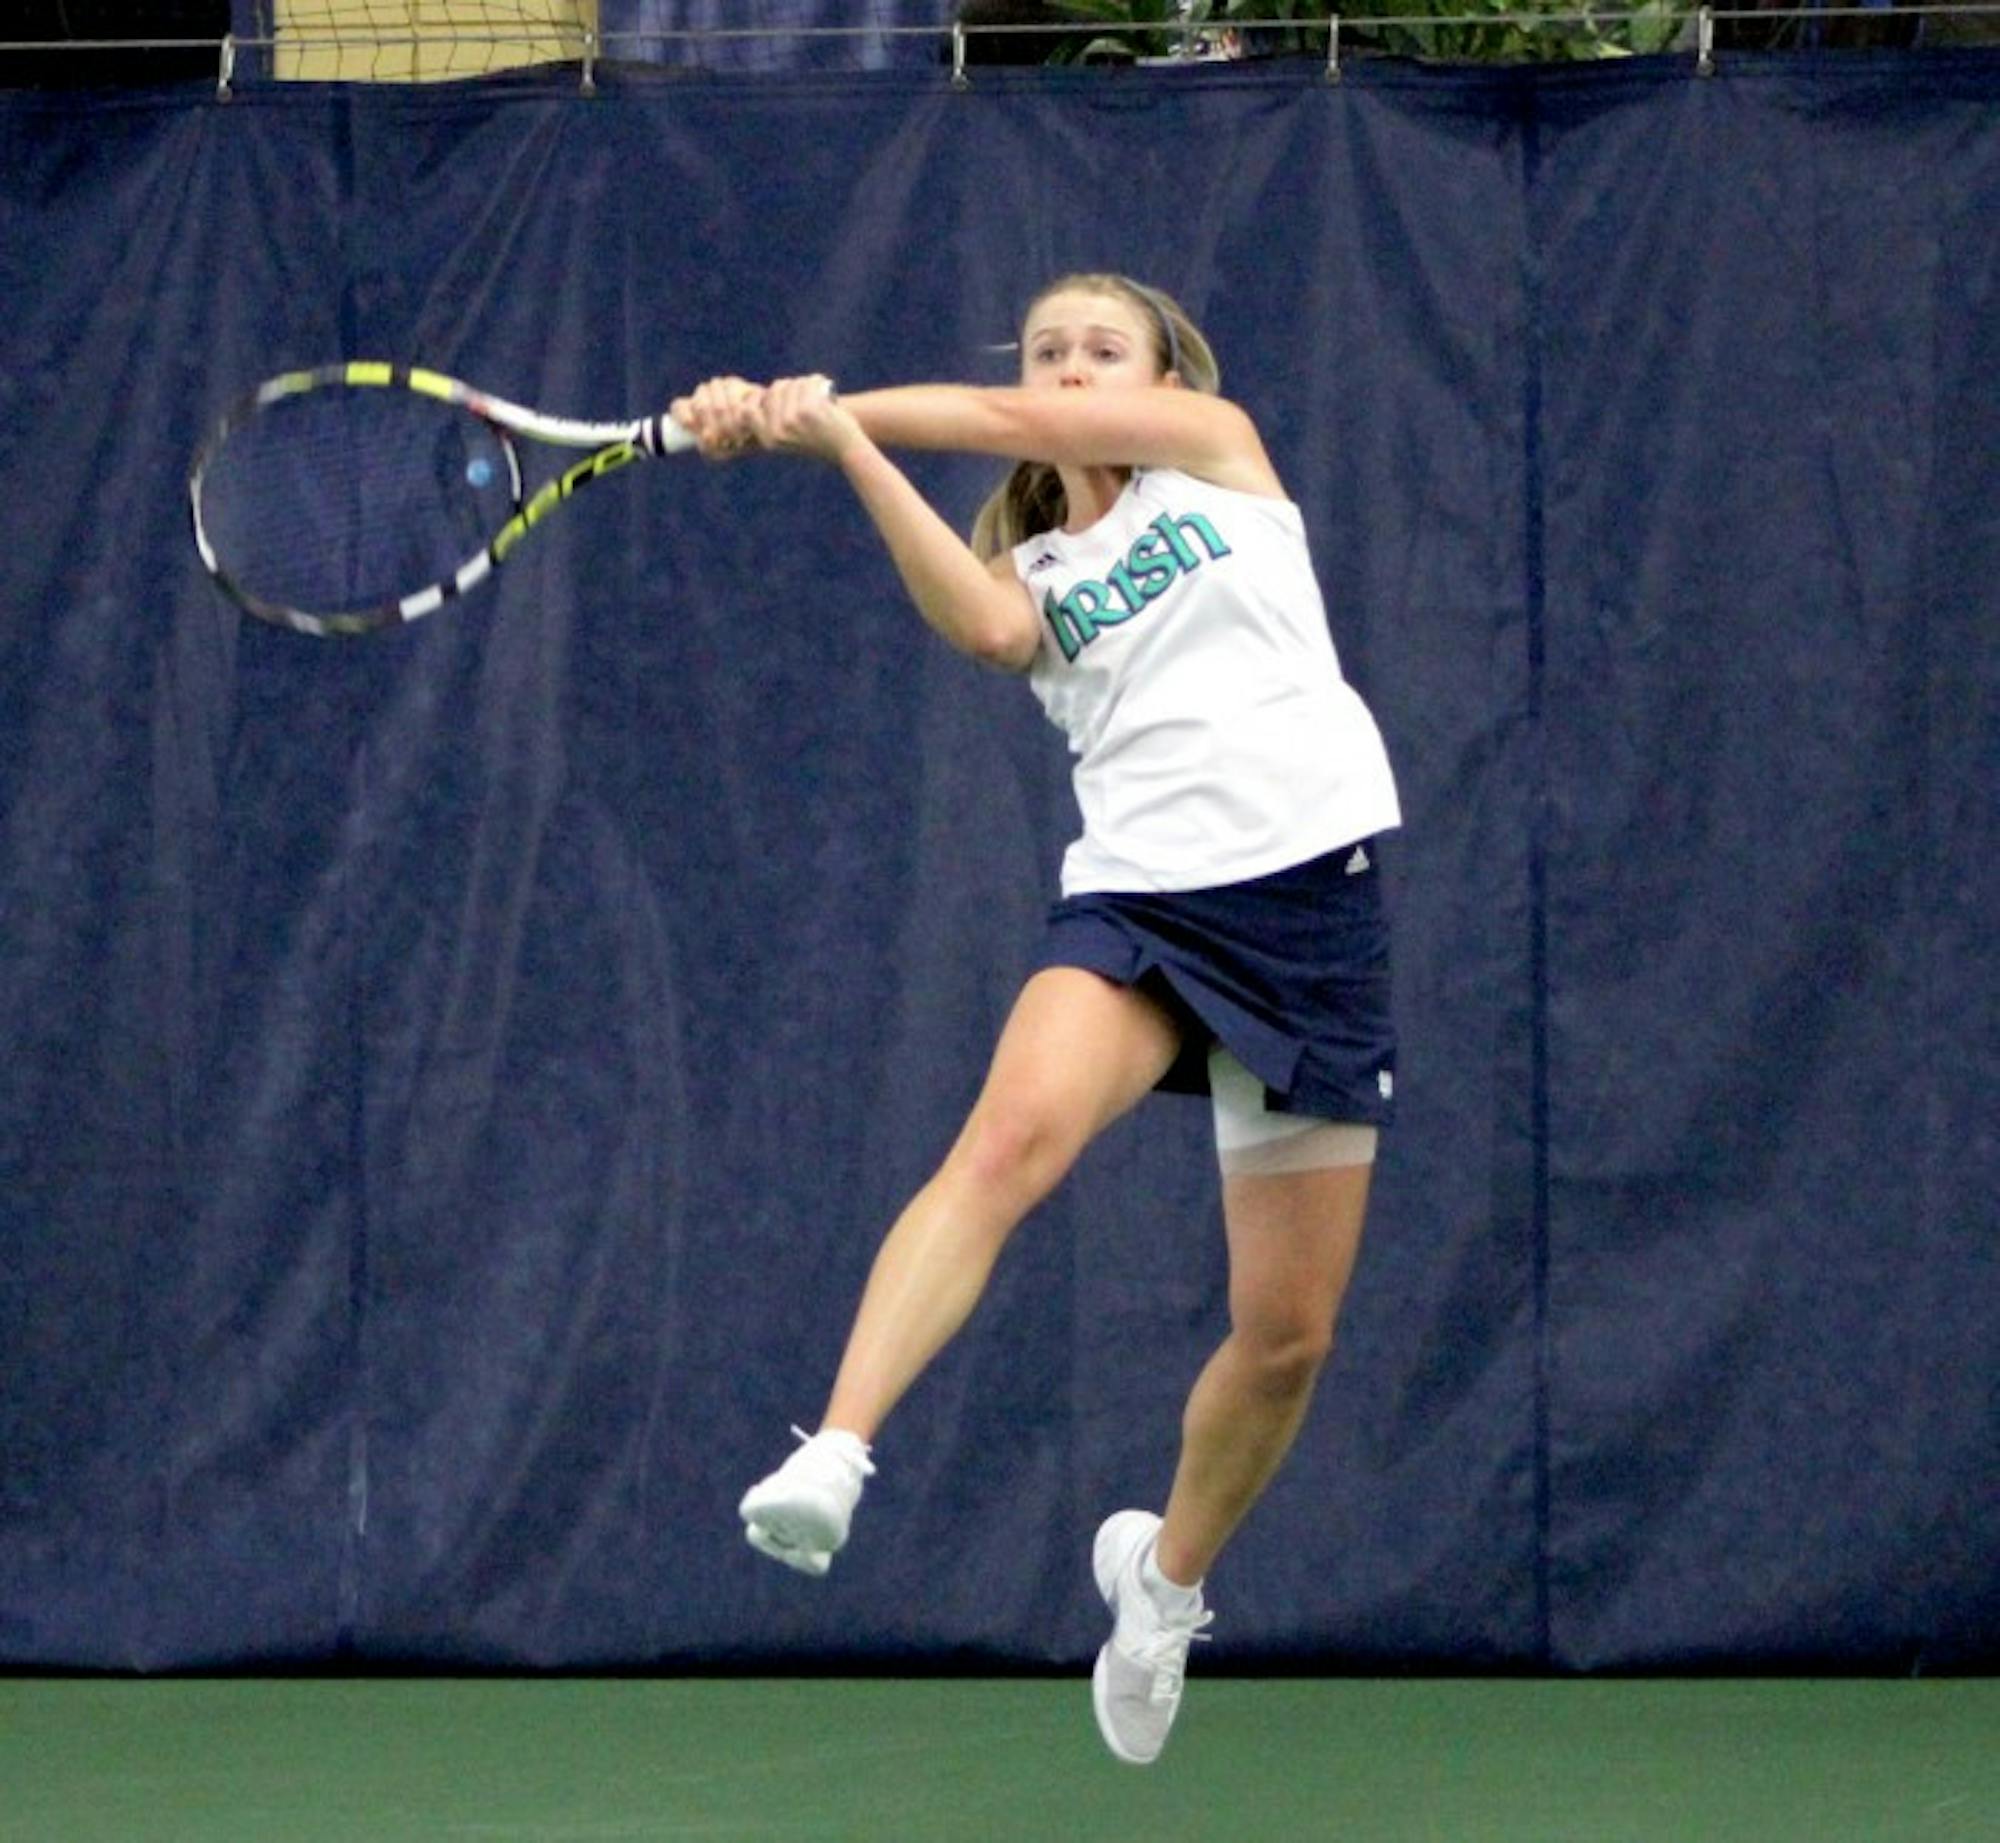 Sophomore Monica Robinson returns a forehand in Notre Dame’s 4-3 victory over Indiana on Feb. 2. Robinson lost her individual match to Sophie Garre, 4-6, 6-3, 1-0.